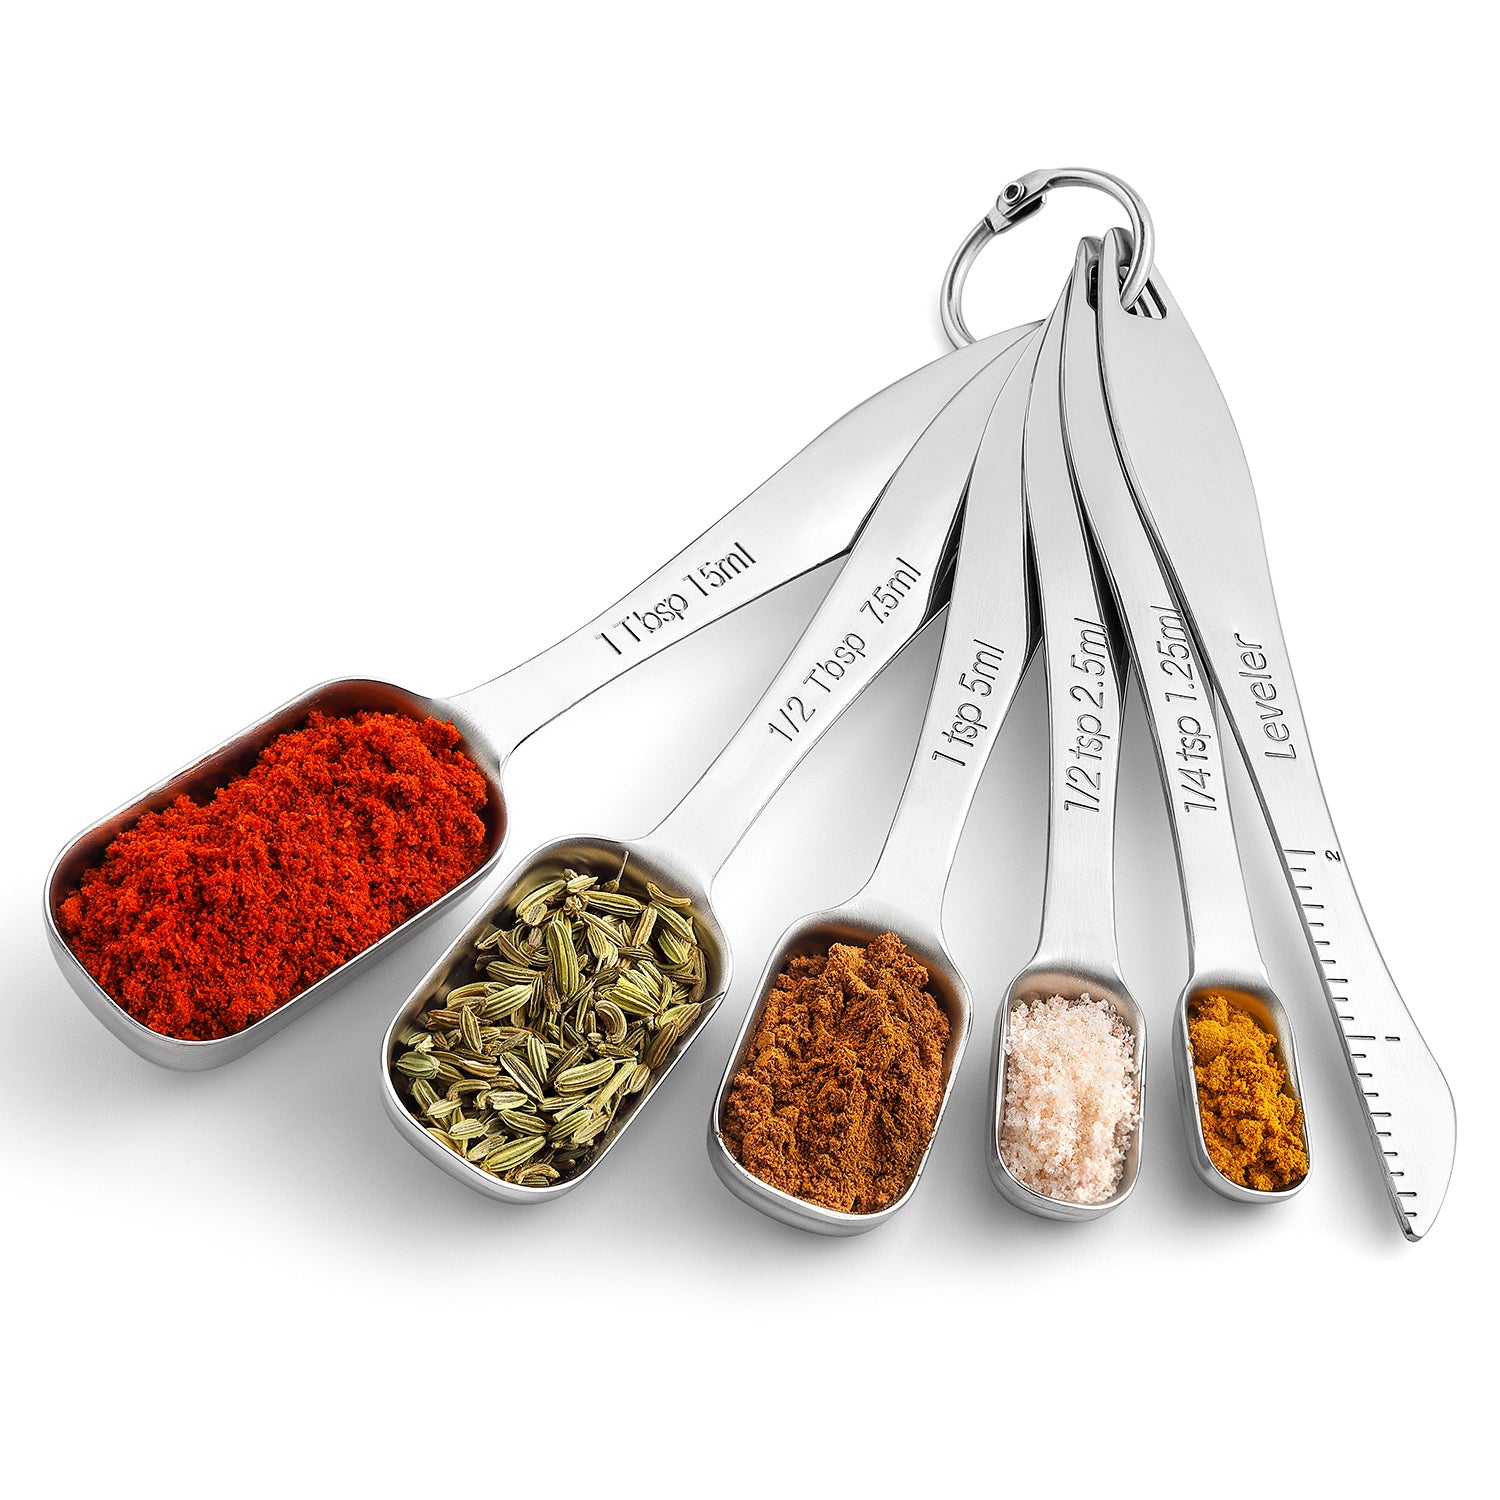 Gold Measuring Spoons - Set of 7 Includes Leveler - Premium Heavy-Duty Stainless Steel